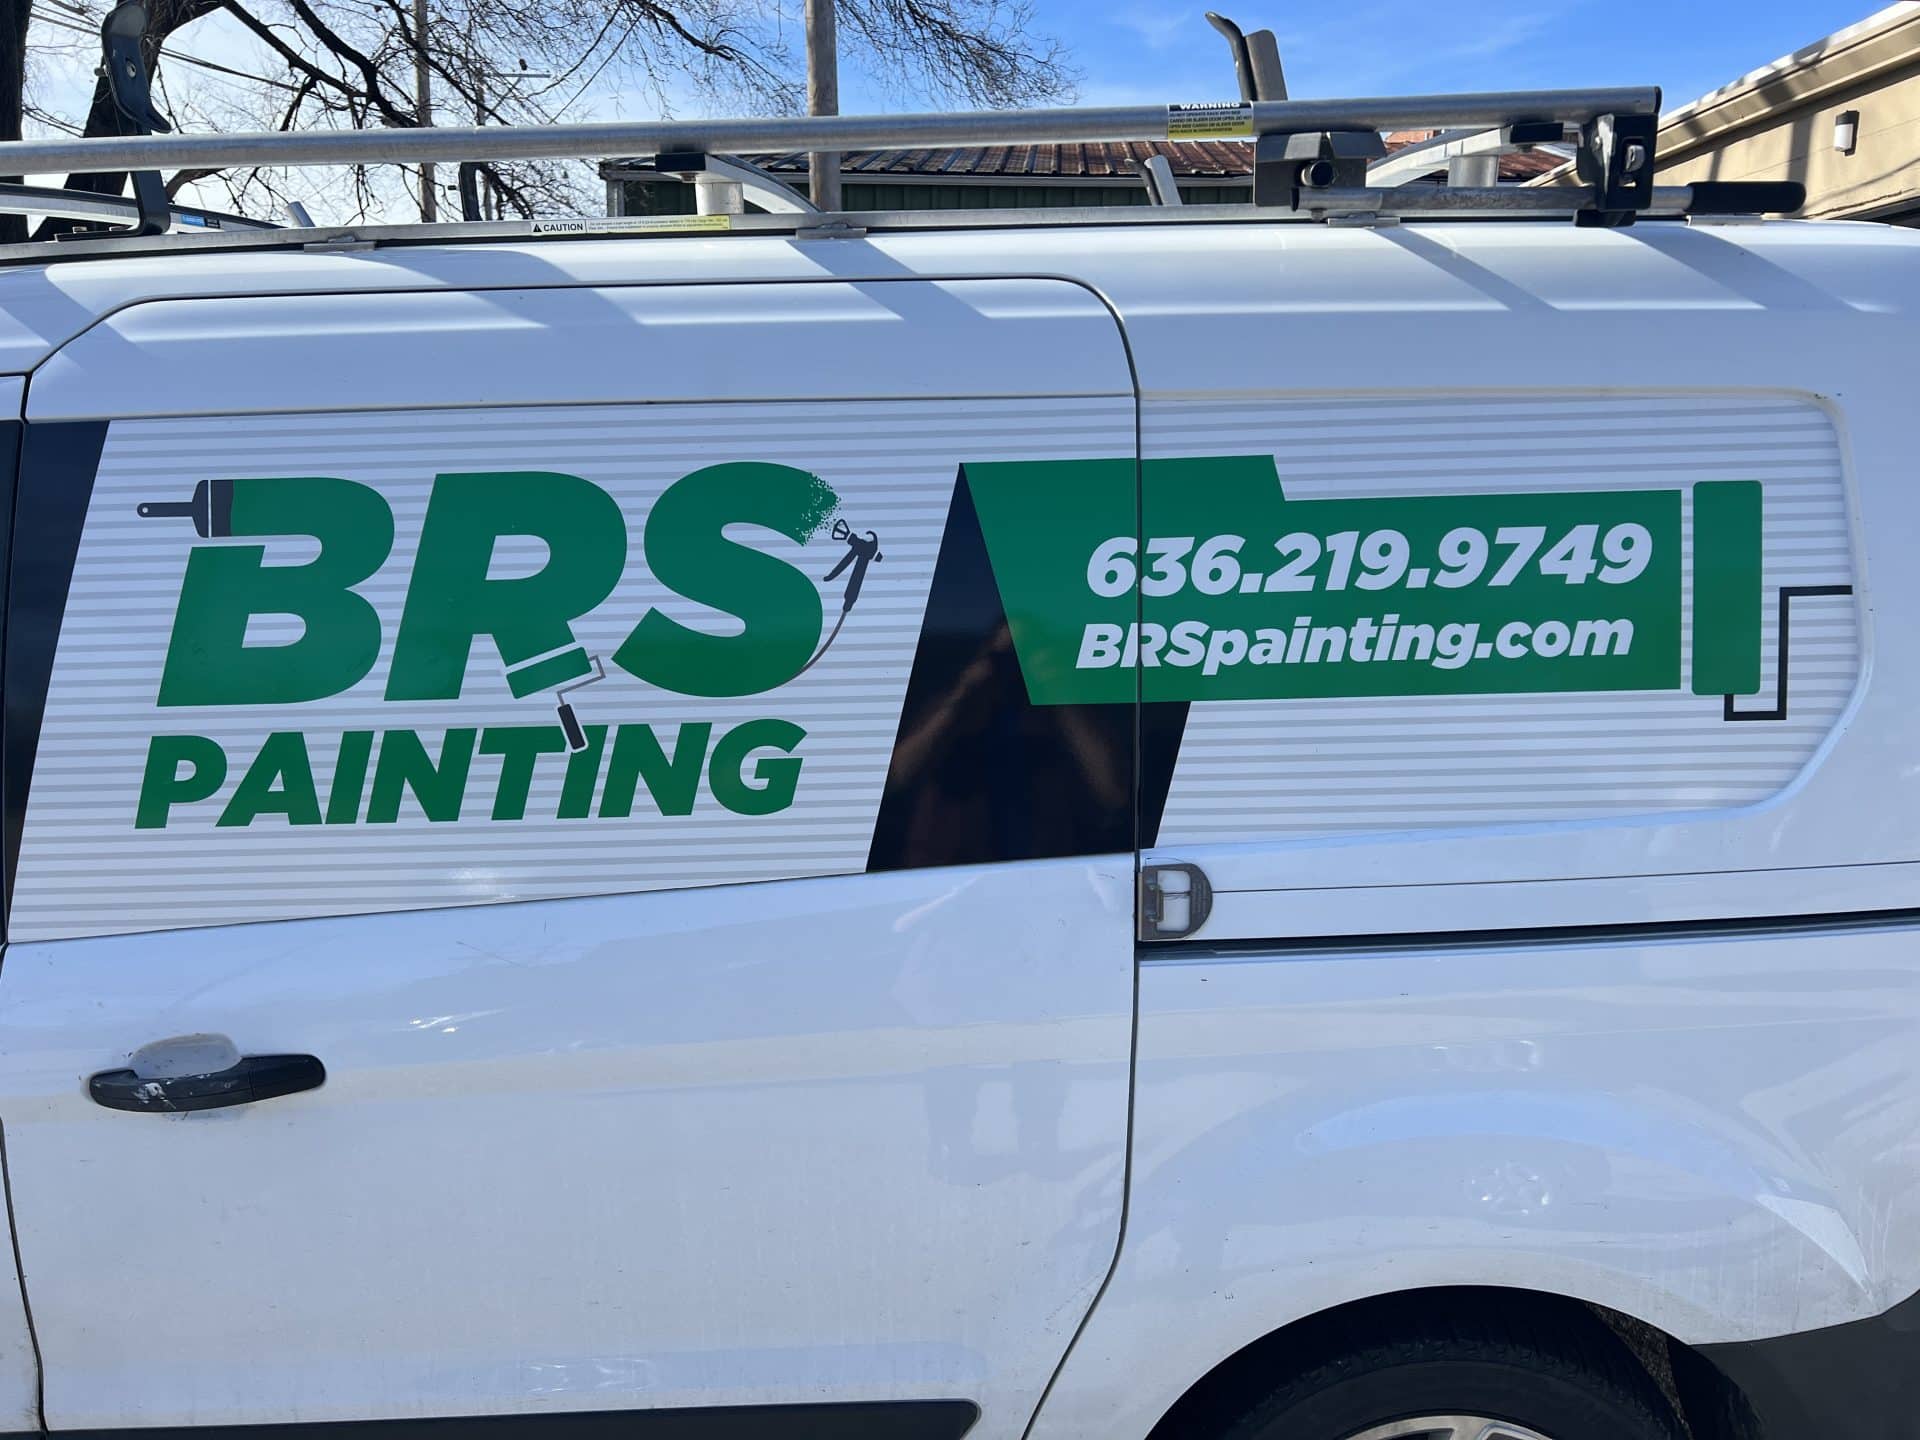 The work van for BRS Painting.